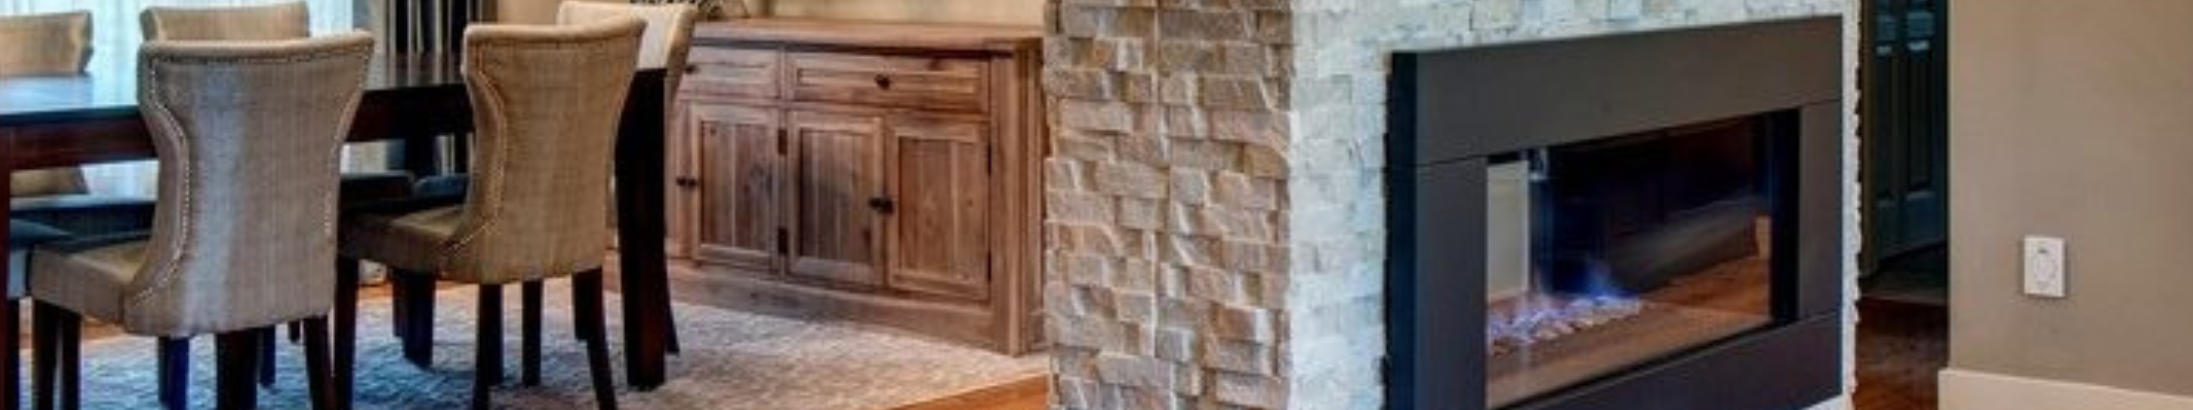 Canadian masonry Services's profile banner